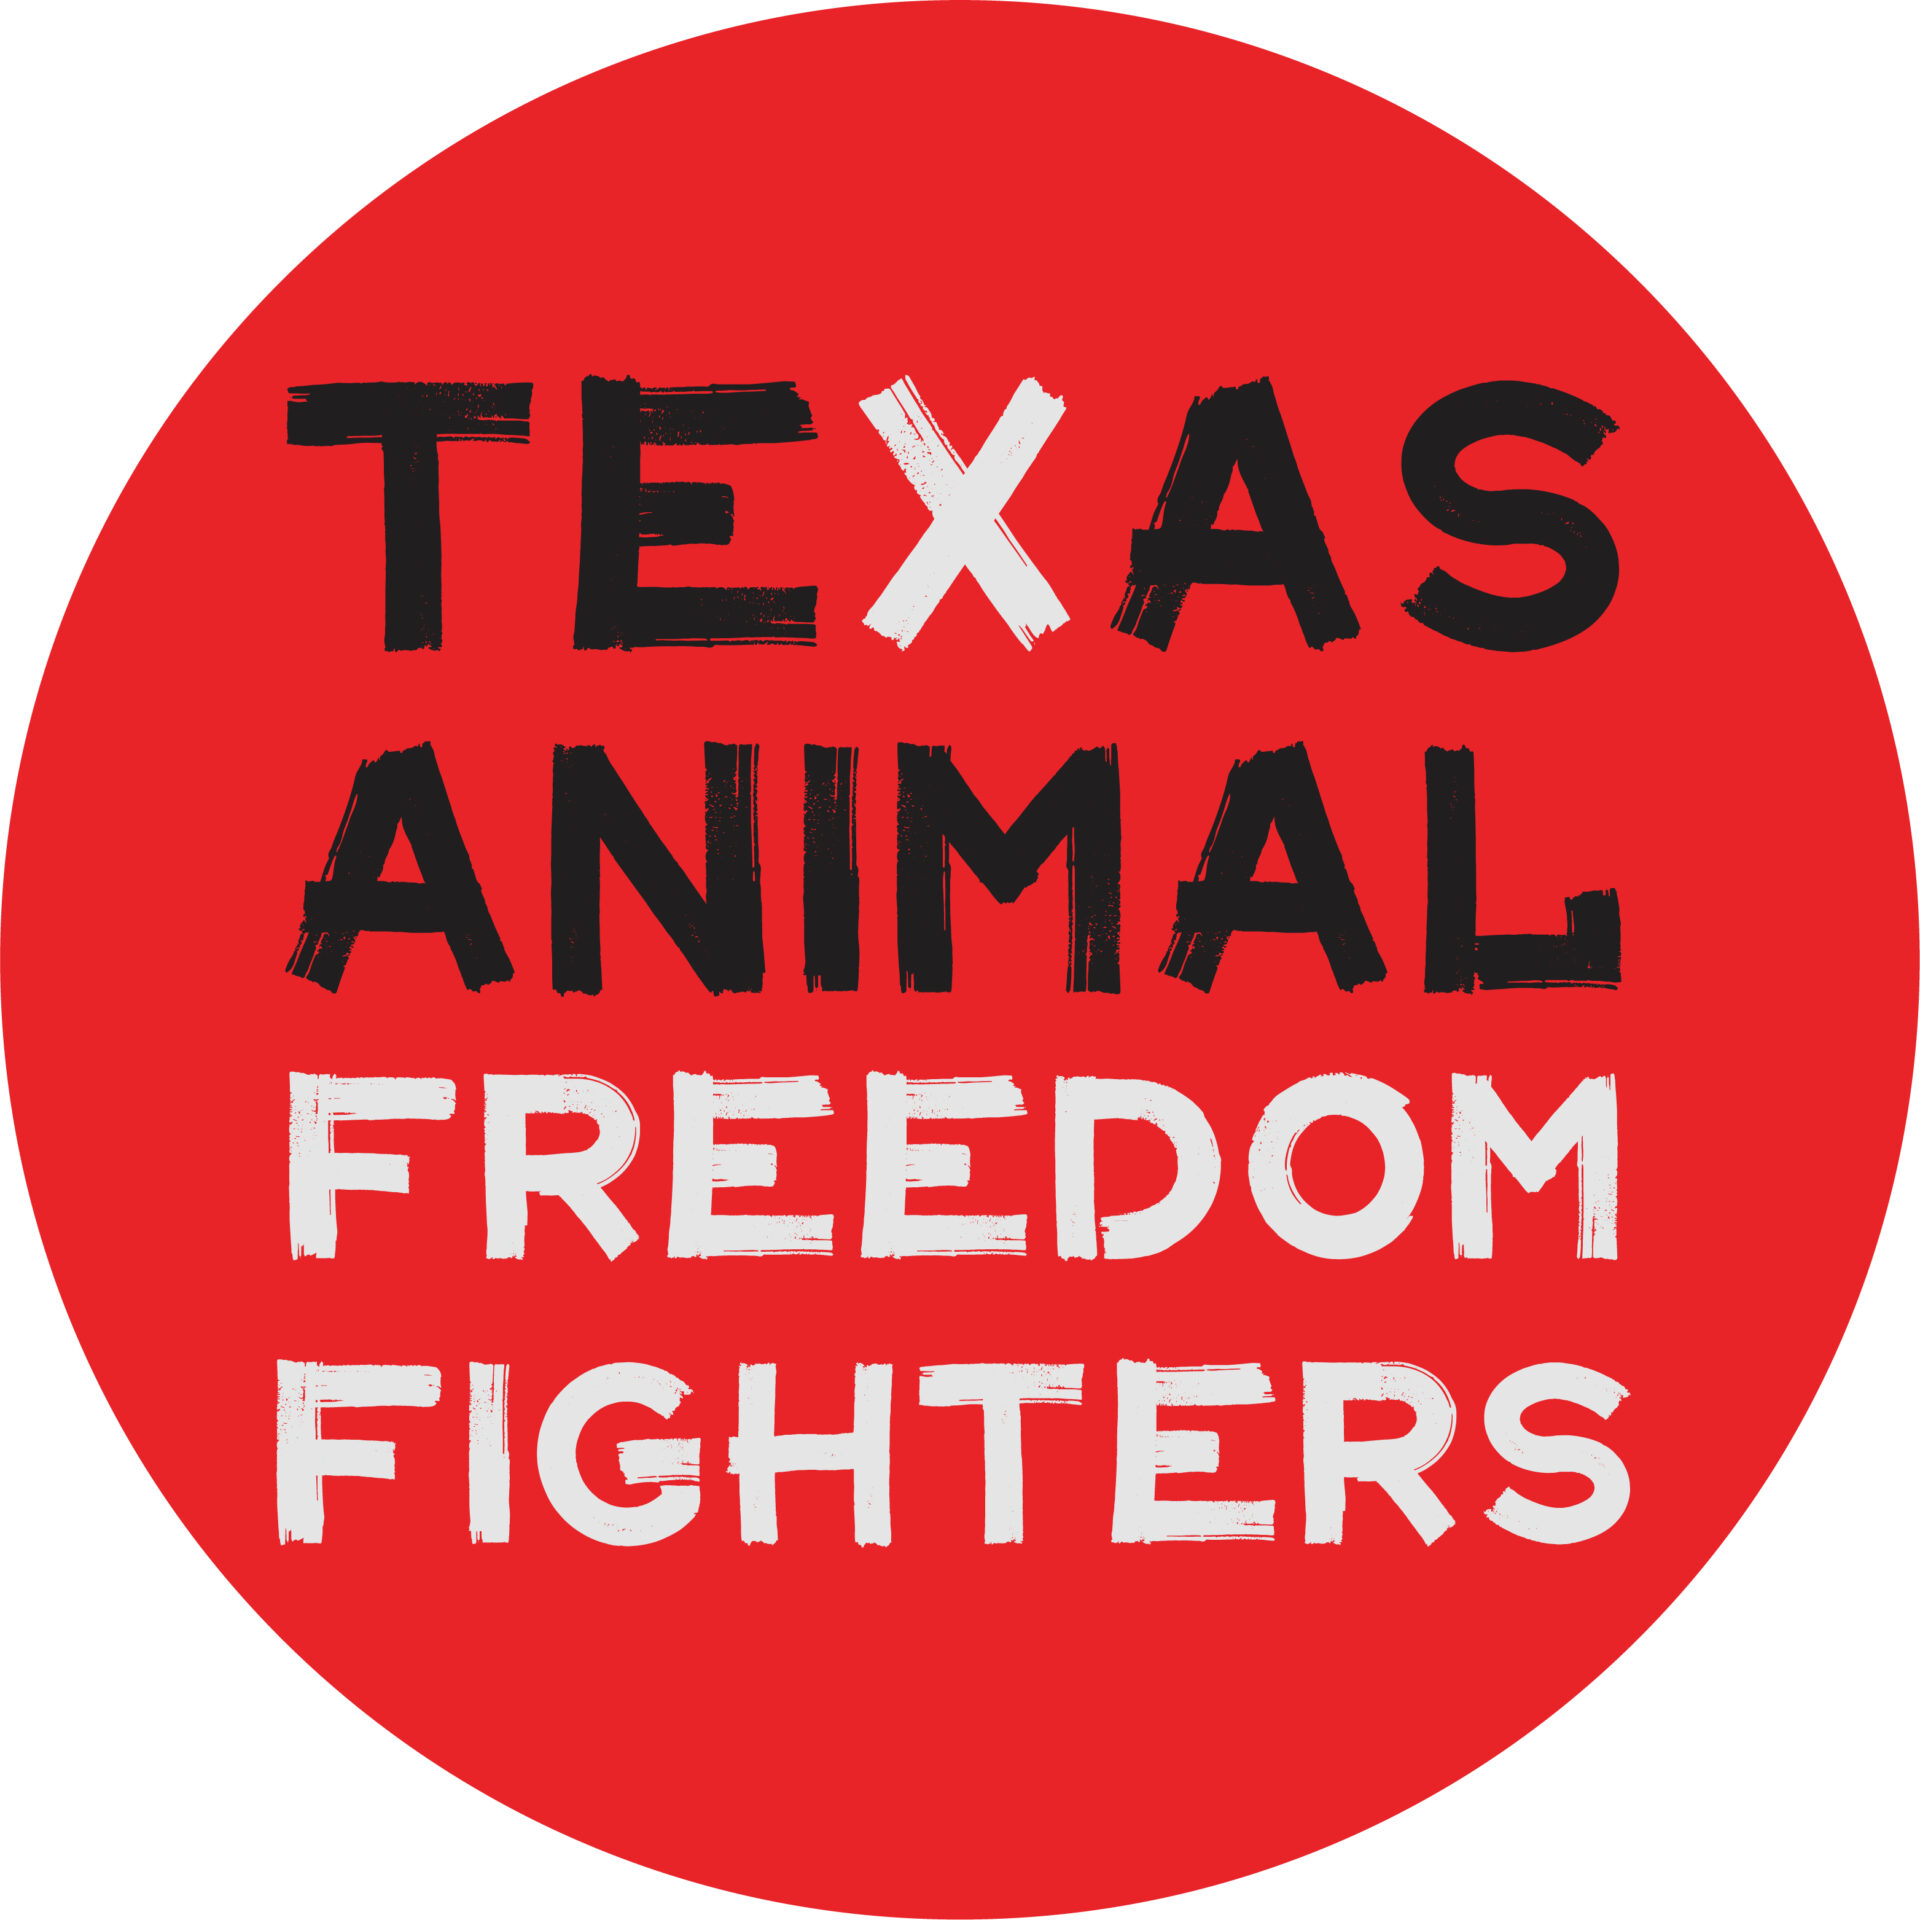 Texas Animal Freedom Fighters